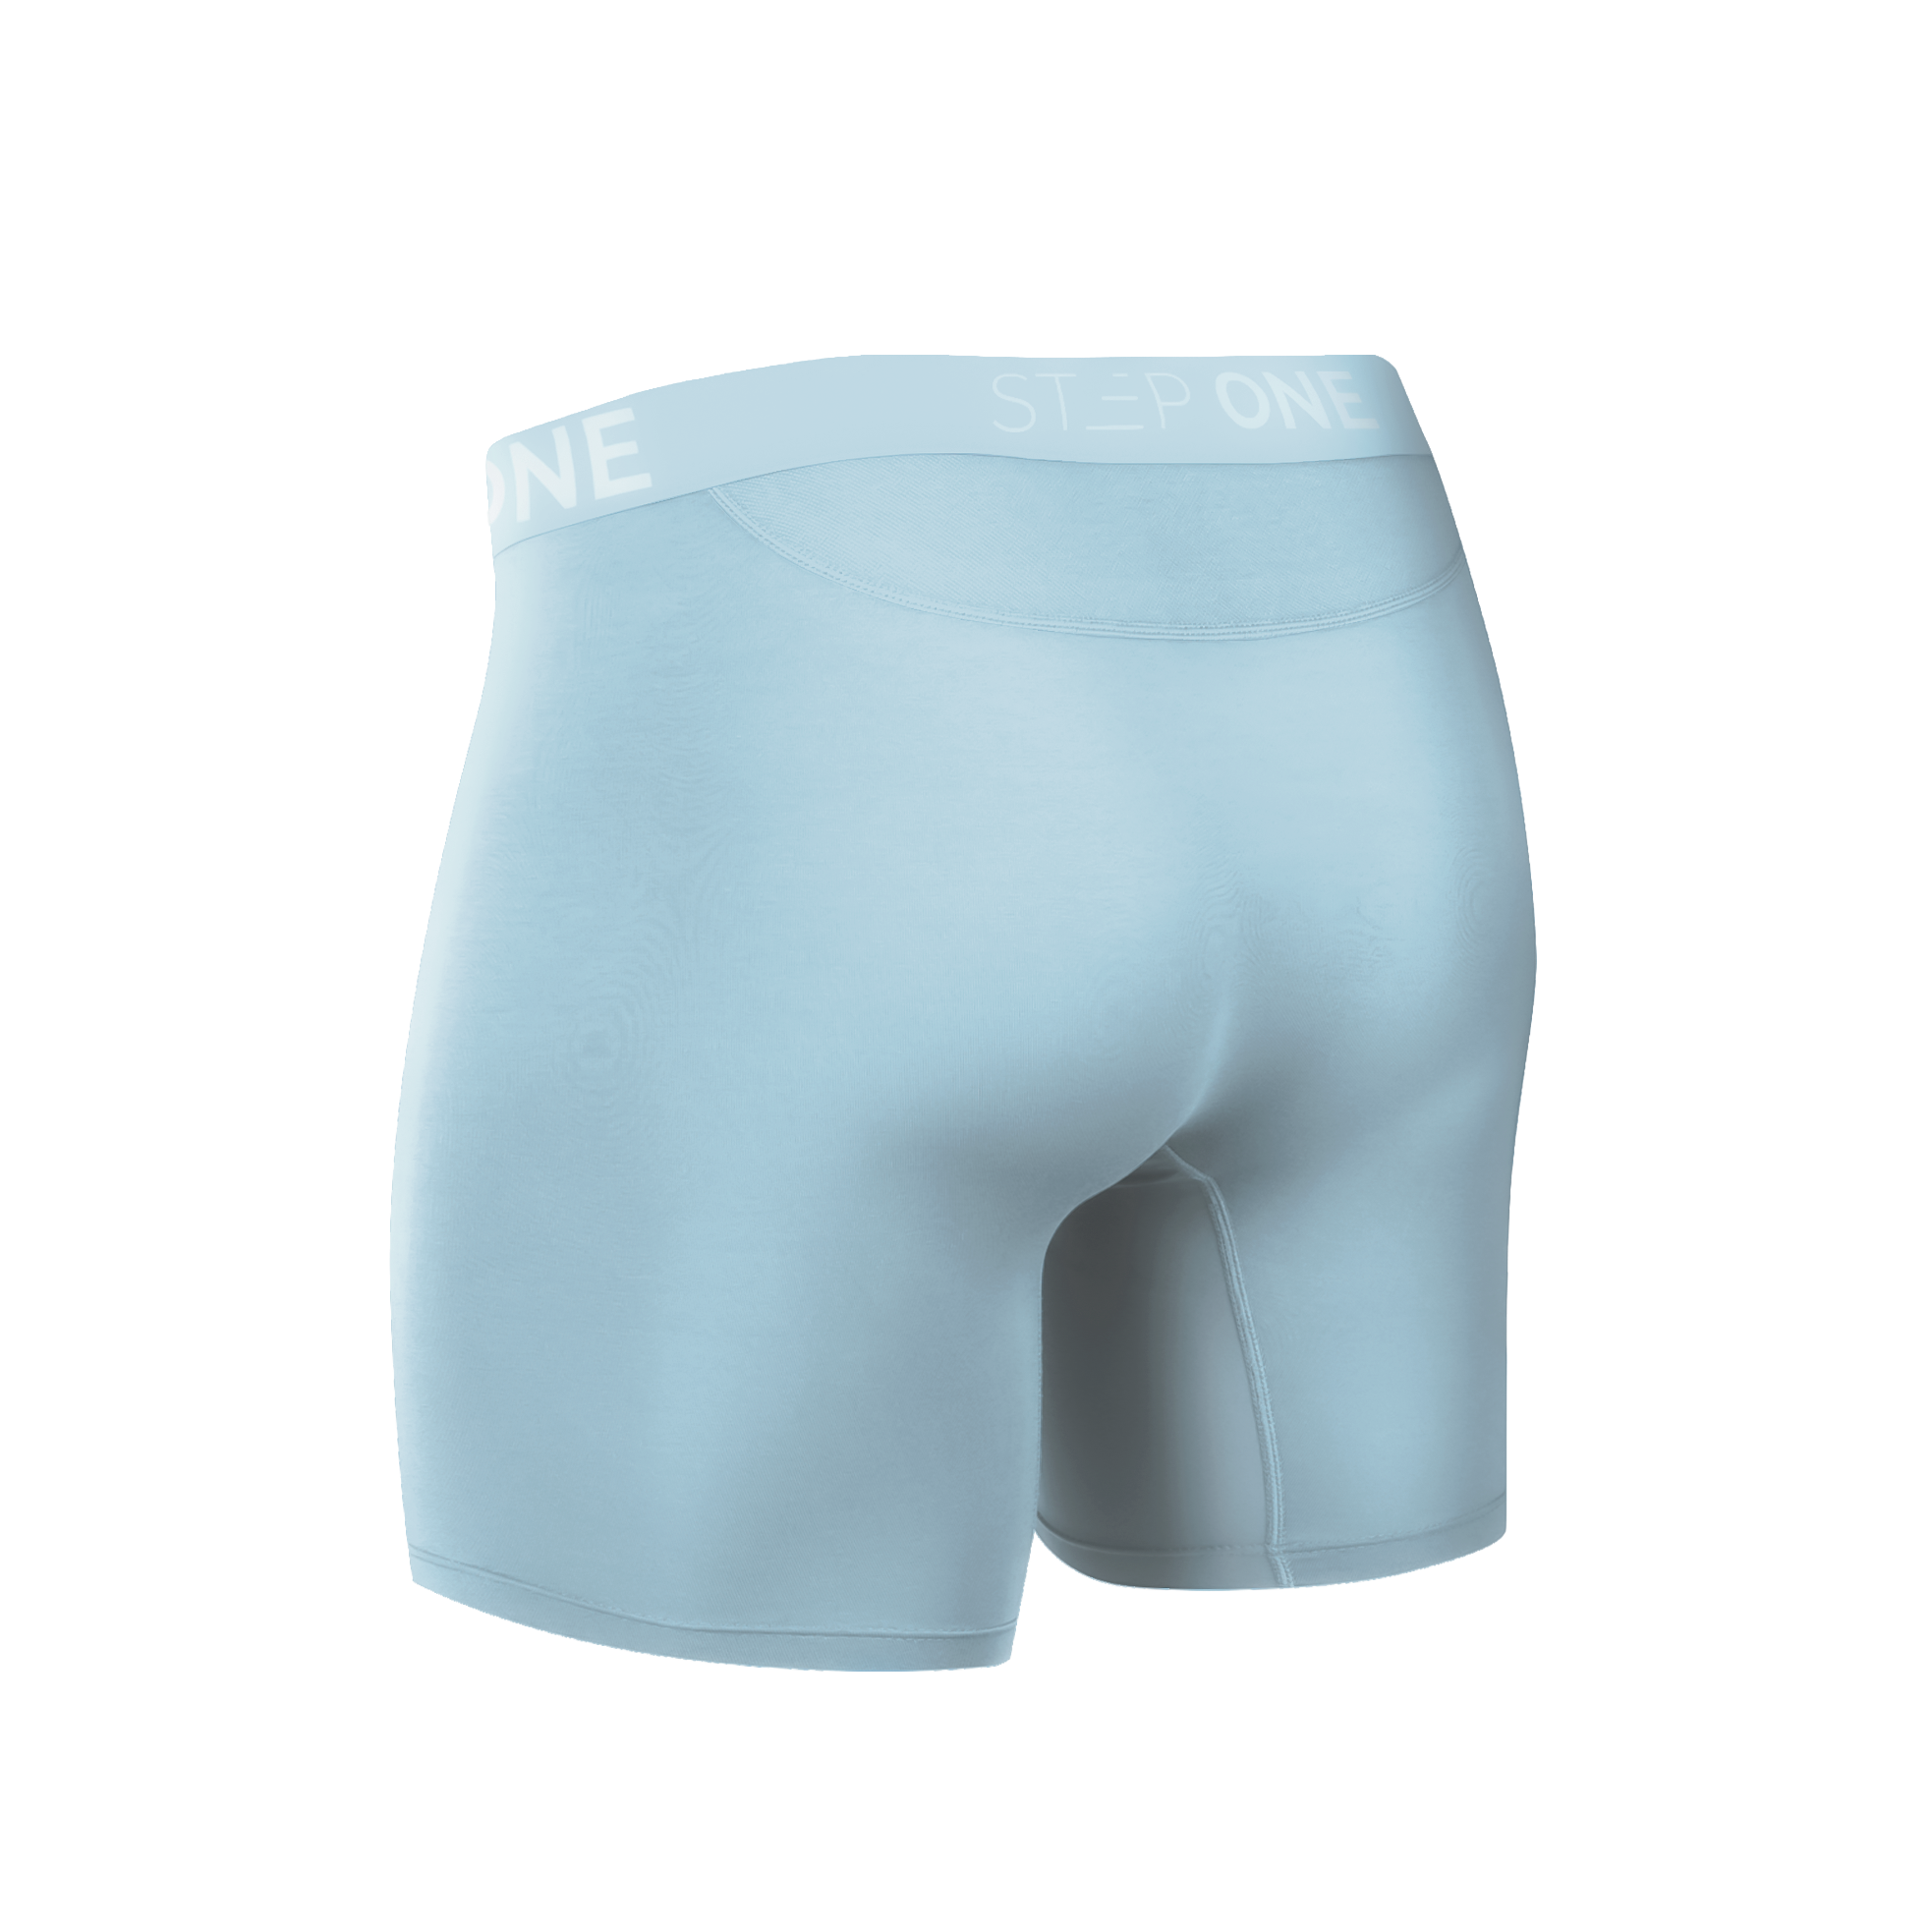 Boxer Brief - Ice Cubes - View 3